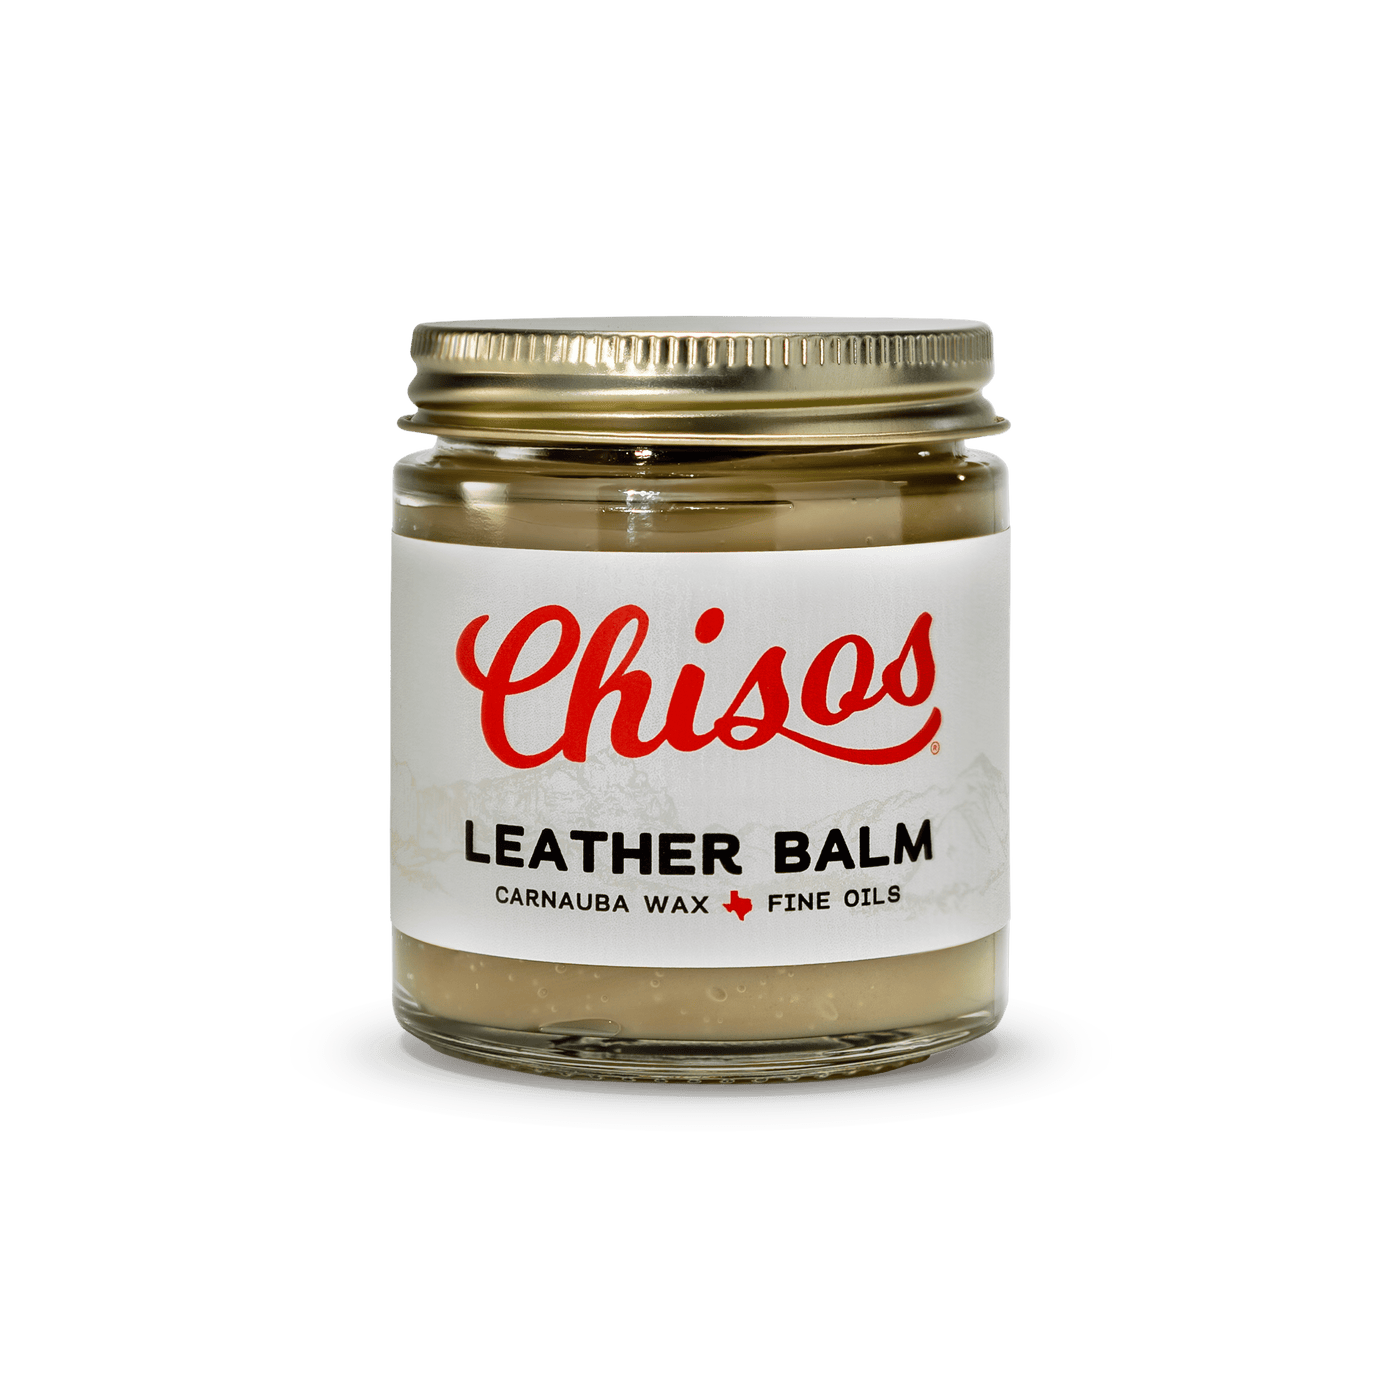 Chisos Leather Care Leather Balm